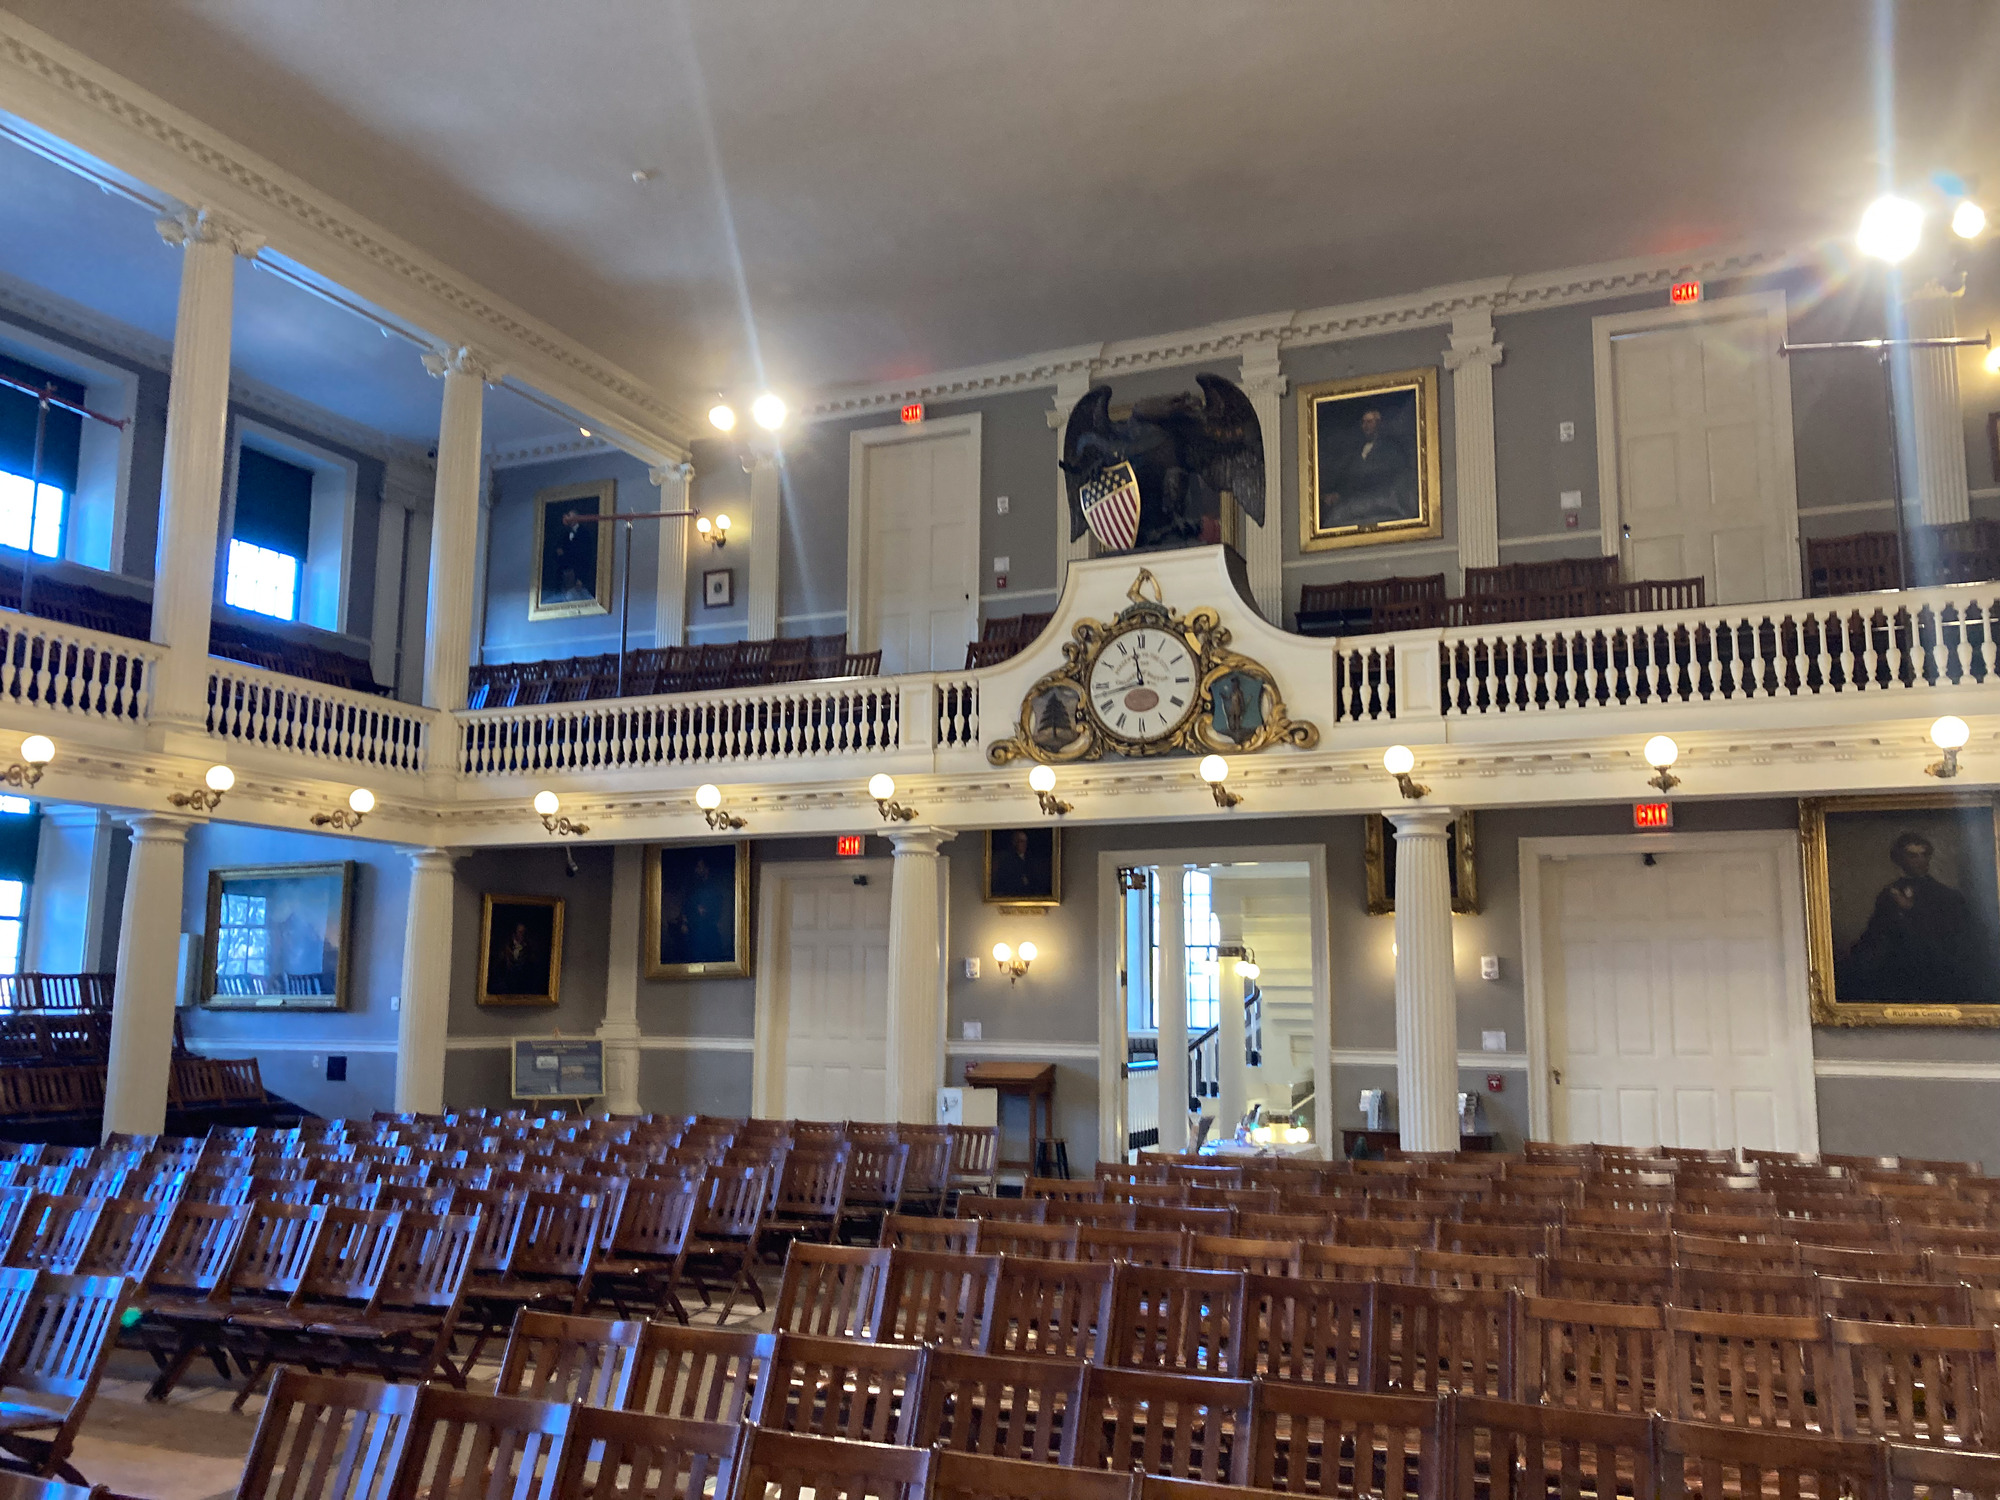 Interior view of back side of the Great Hall in Faneuil Hall, on the floor are brown wooden chairs that are connected. On the back wall is three big doors, the middle one is open. Above it is an ornate clock on the balcony railing. It has a big white clockface with gold gilding around the edges. Above it is a brown eagle holding a crest with red, white, and blue on it. 